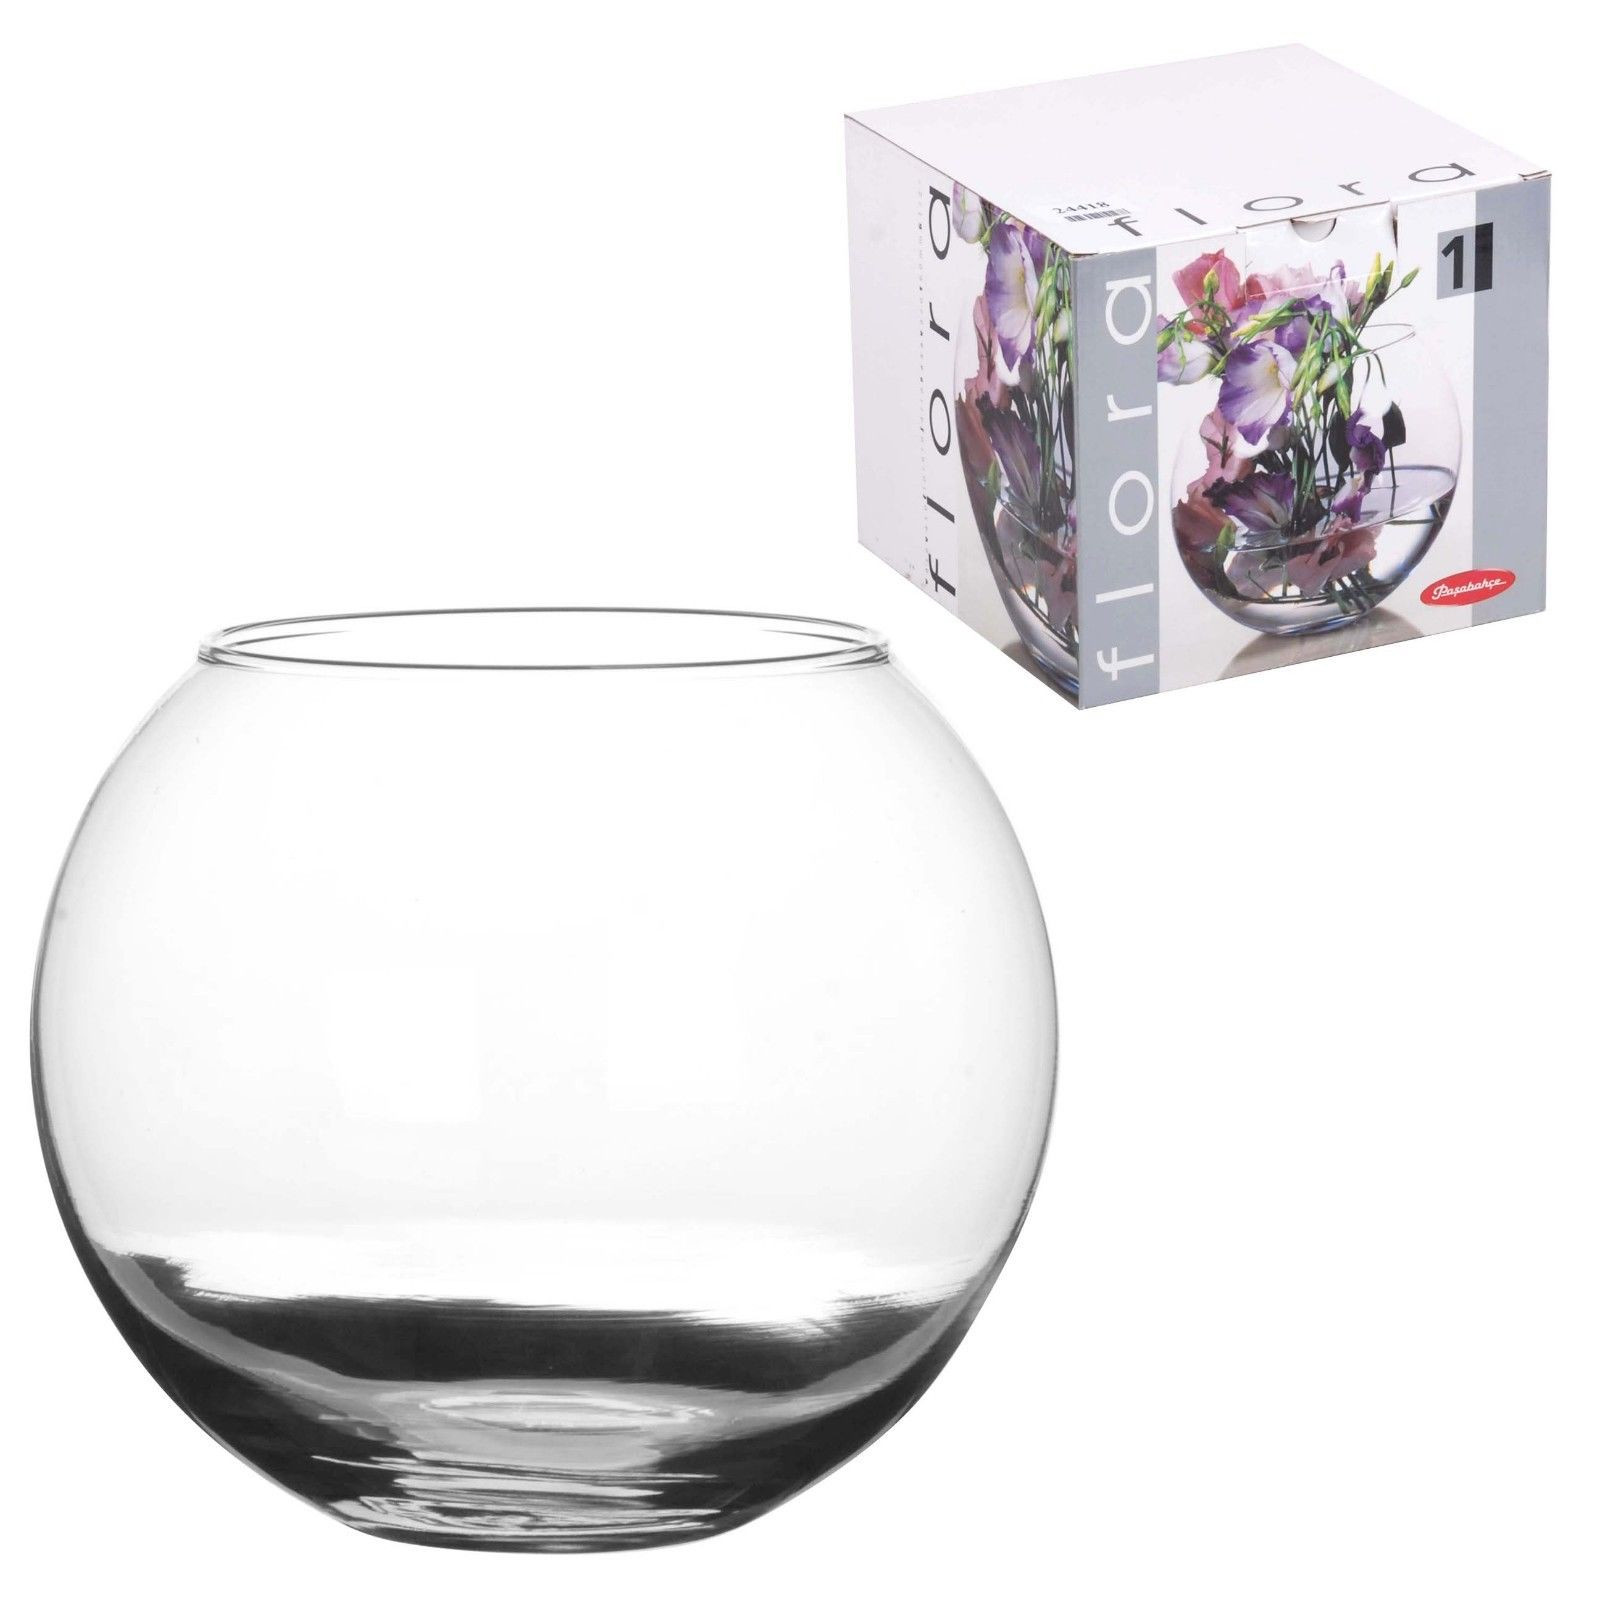 16 Fashionable Clear Crystal Vase Fillers 2024 free download clear crystal vase fillers of pasabahce botanica bowl 45068 ebay throughout norton secured powered by verisign